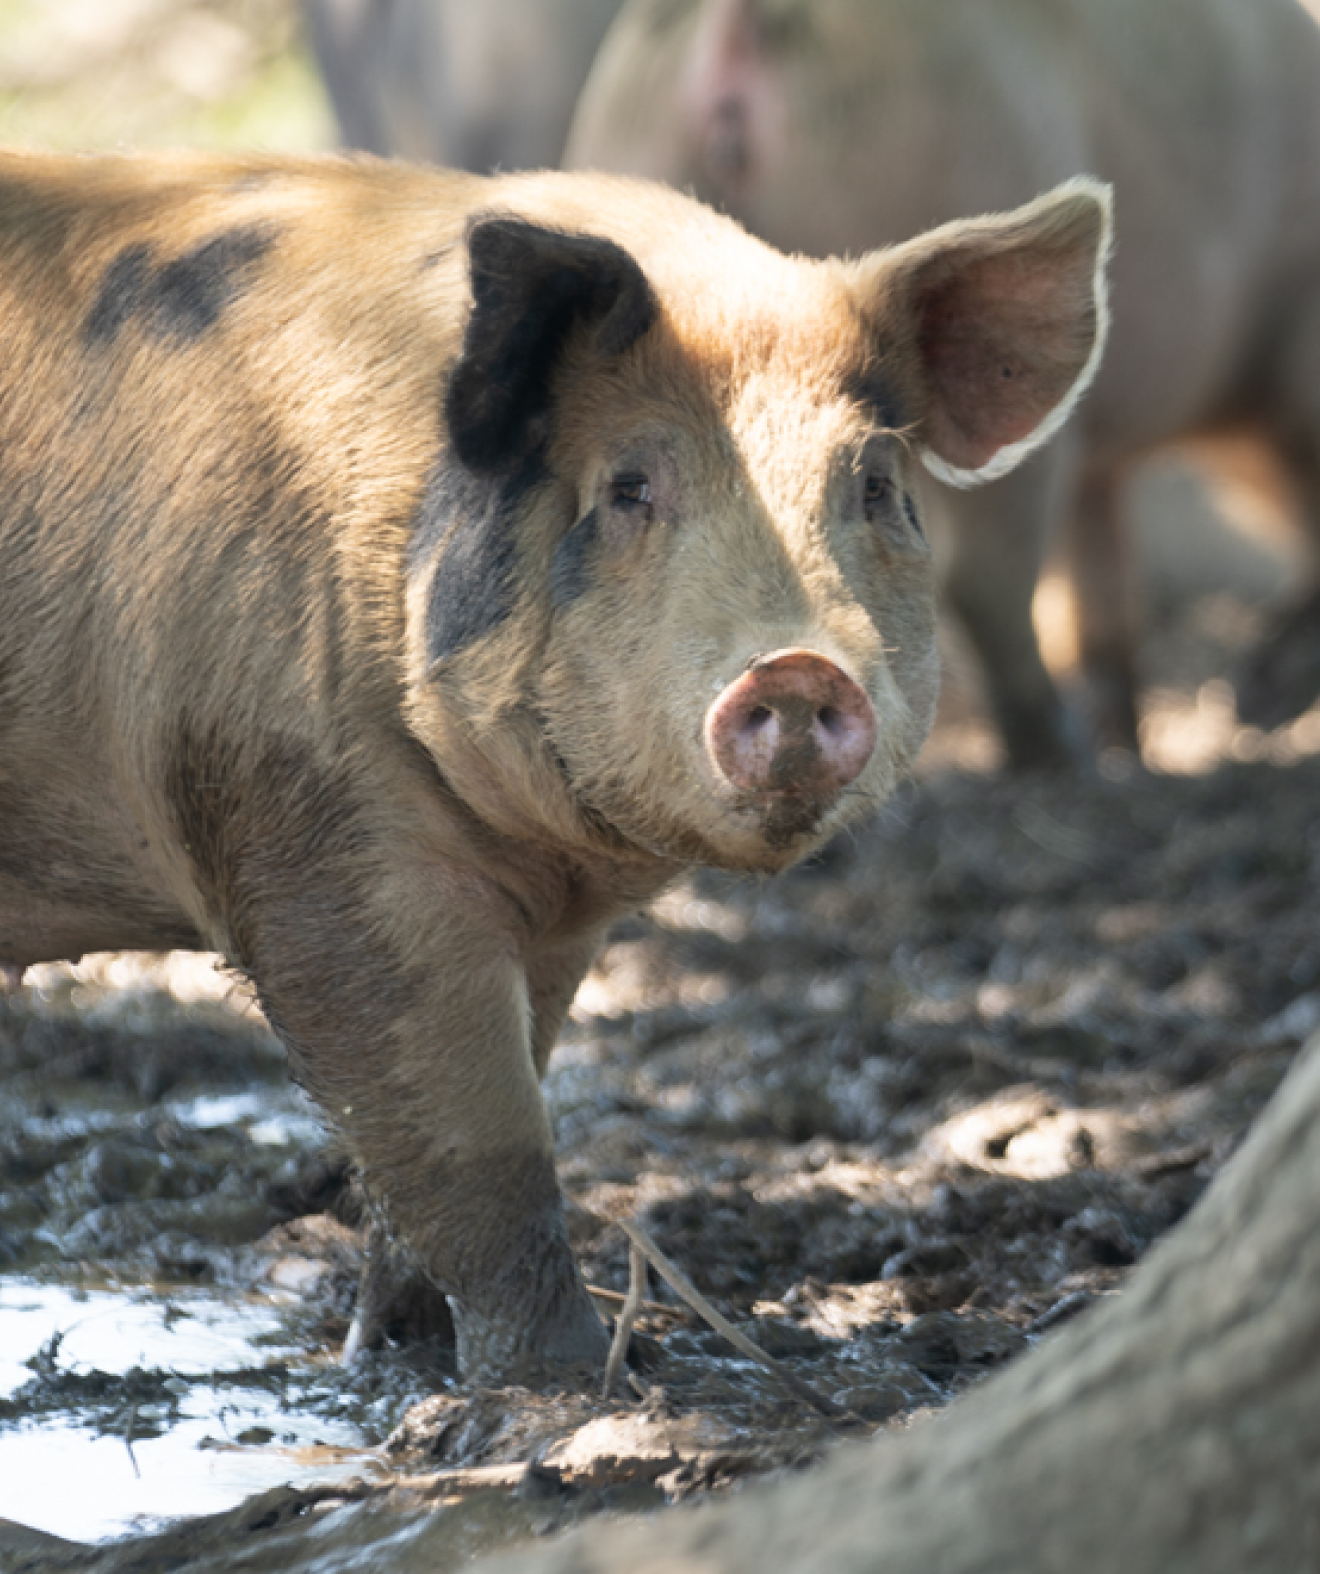 Large pig with dark markings standing in the mud looking into the camera.